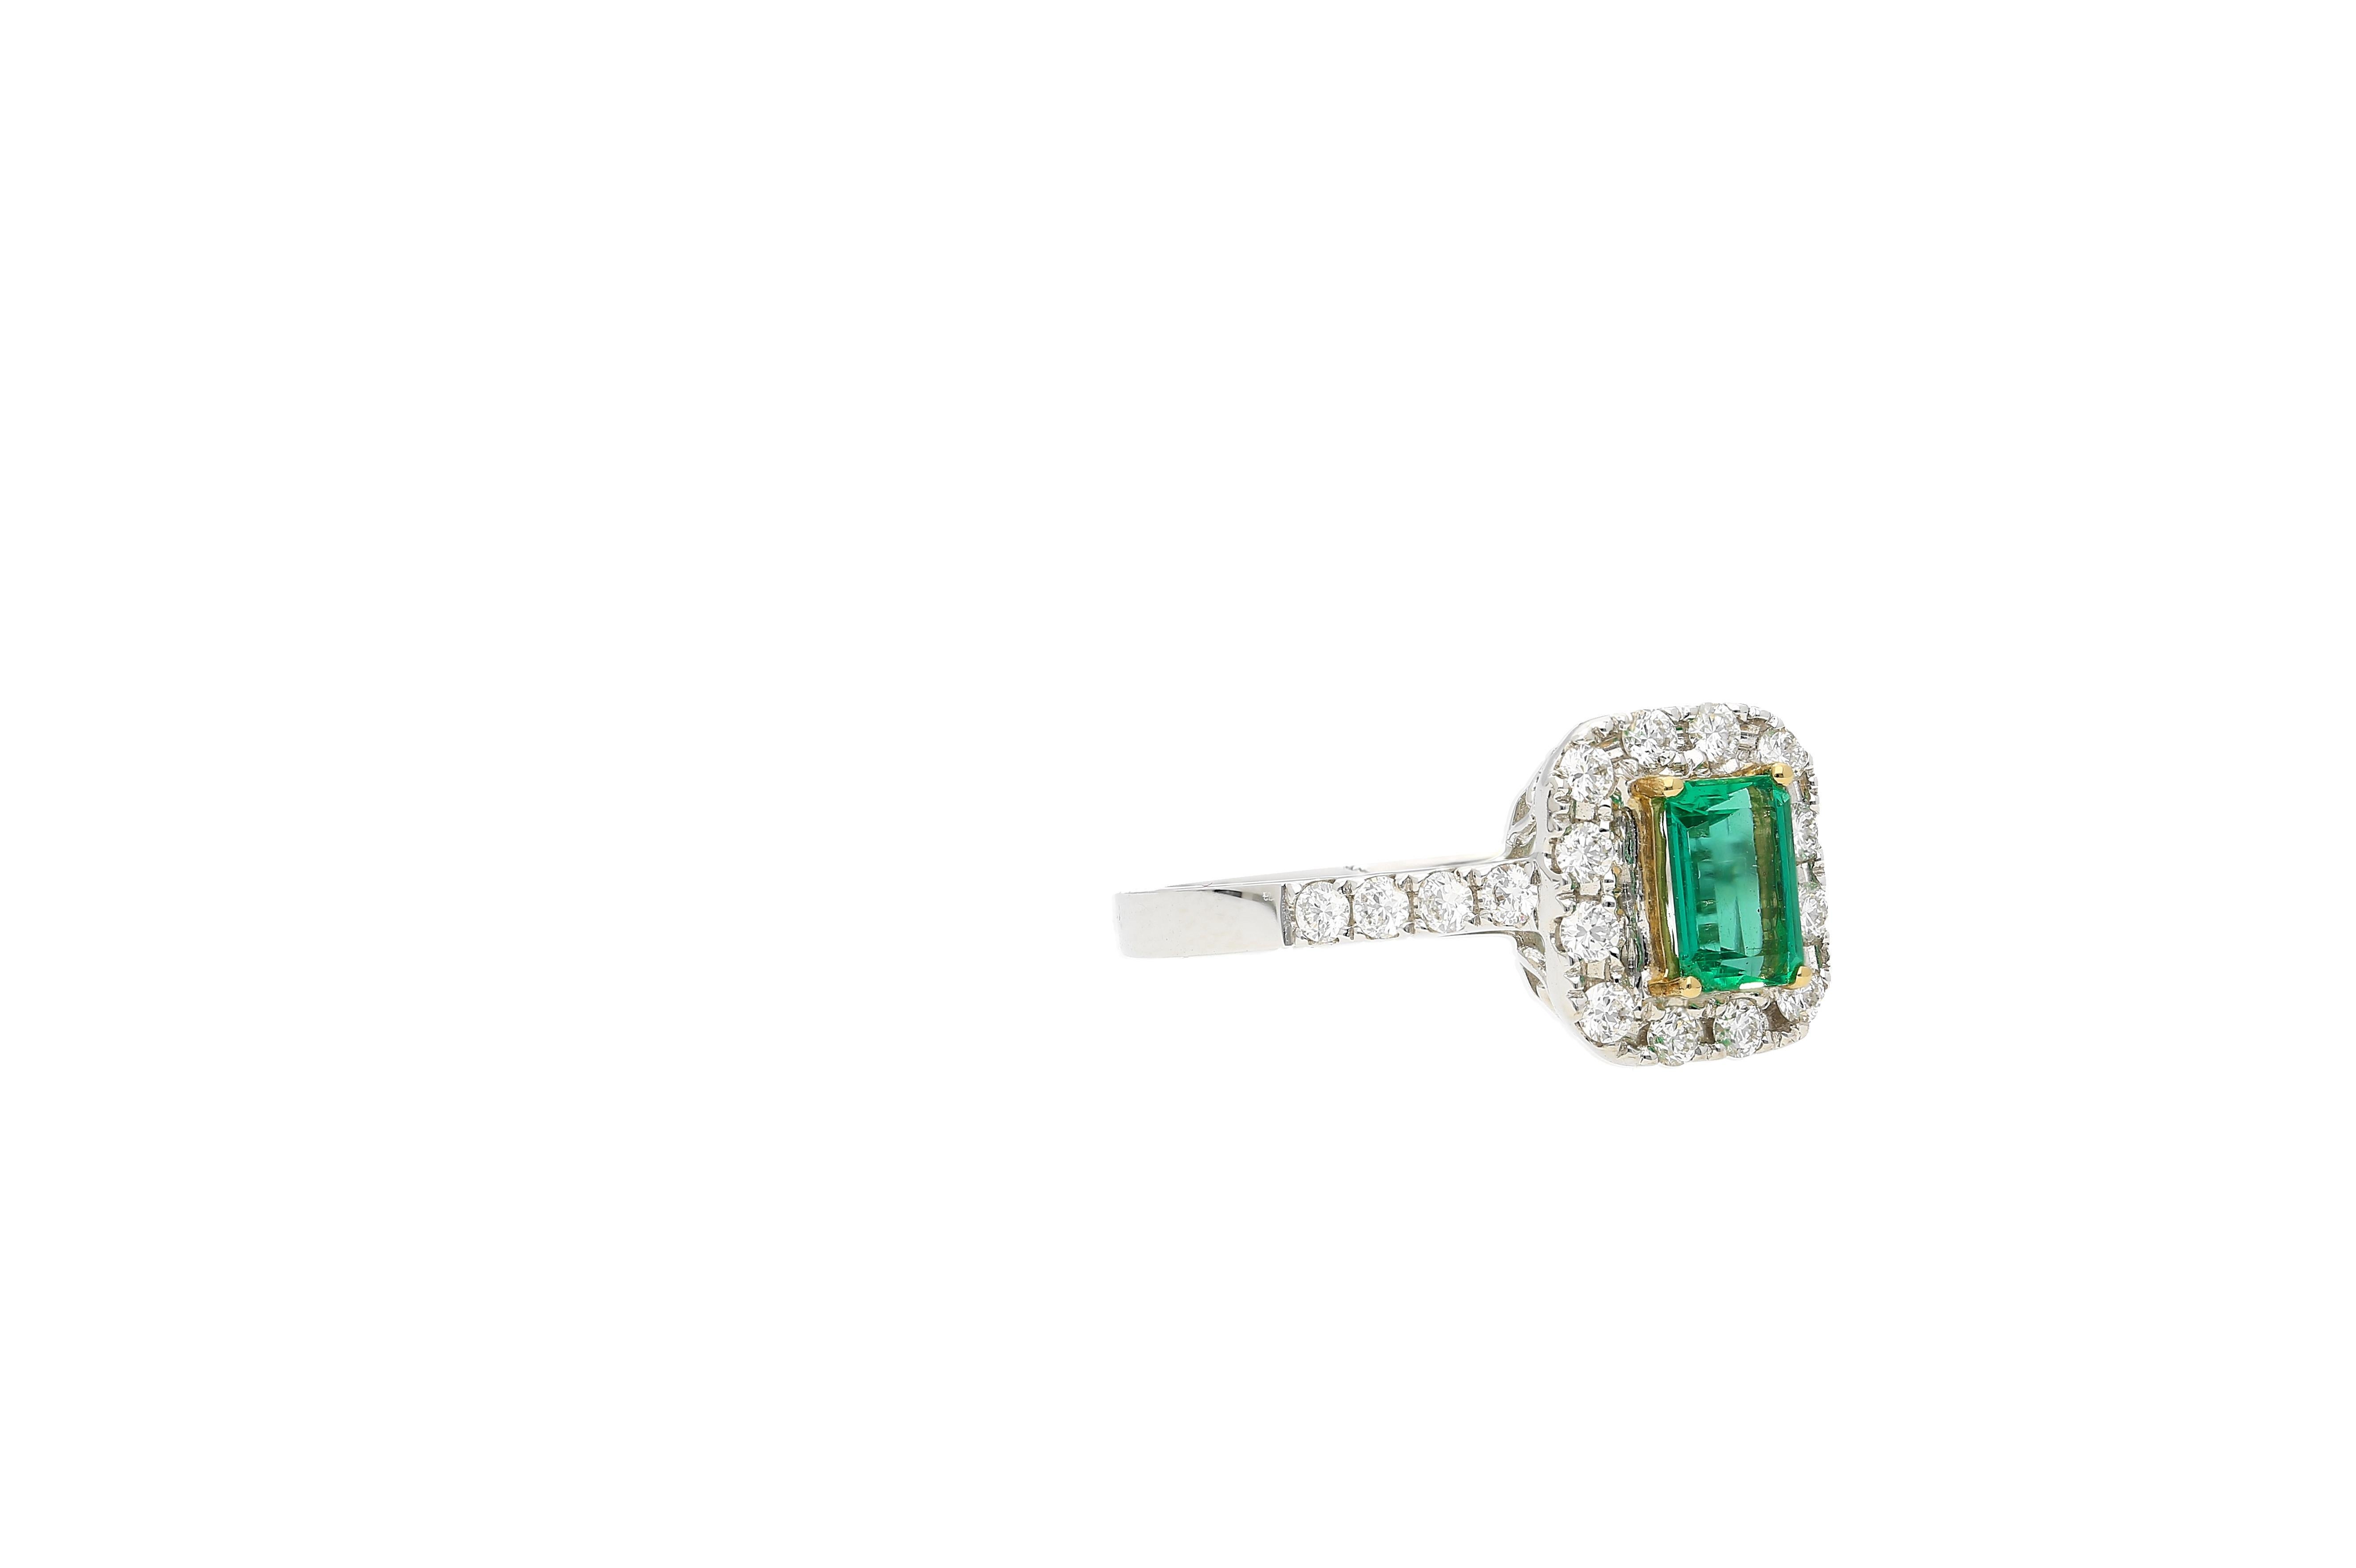 Natural Colombian Emerald of 0.44 carats. Center stone Emerald is surrounded by 20 eye-clean colorless diamonds of 0.35 carats (total). The  Emerald is well contrasted by the yellow gold 4-prong mounting. 

This ring has the structural versatility